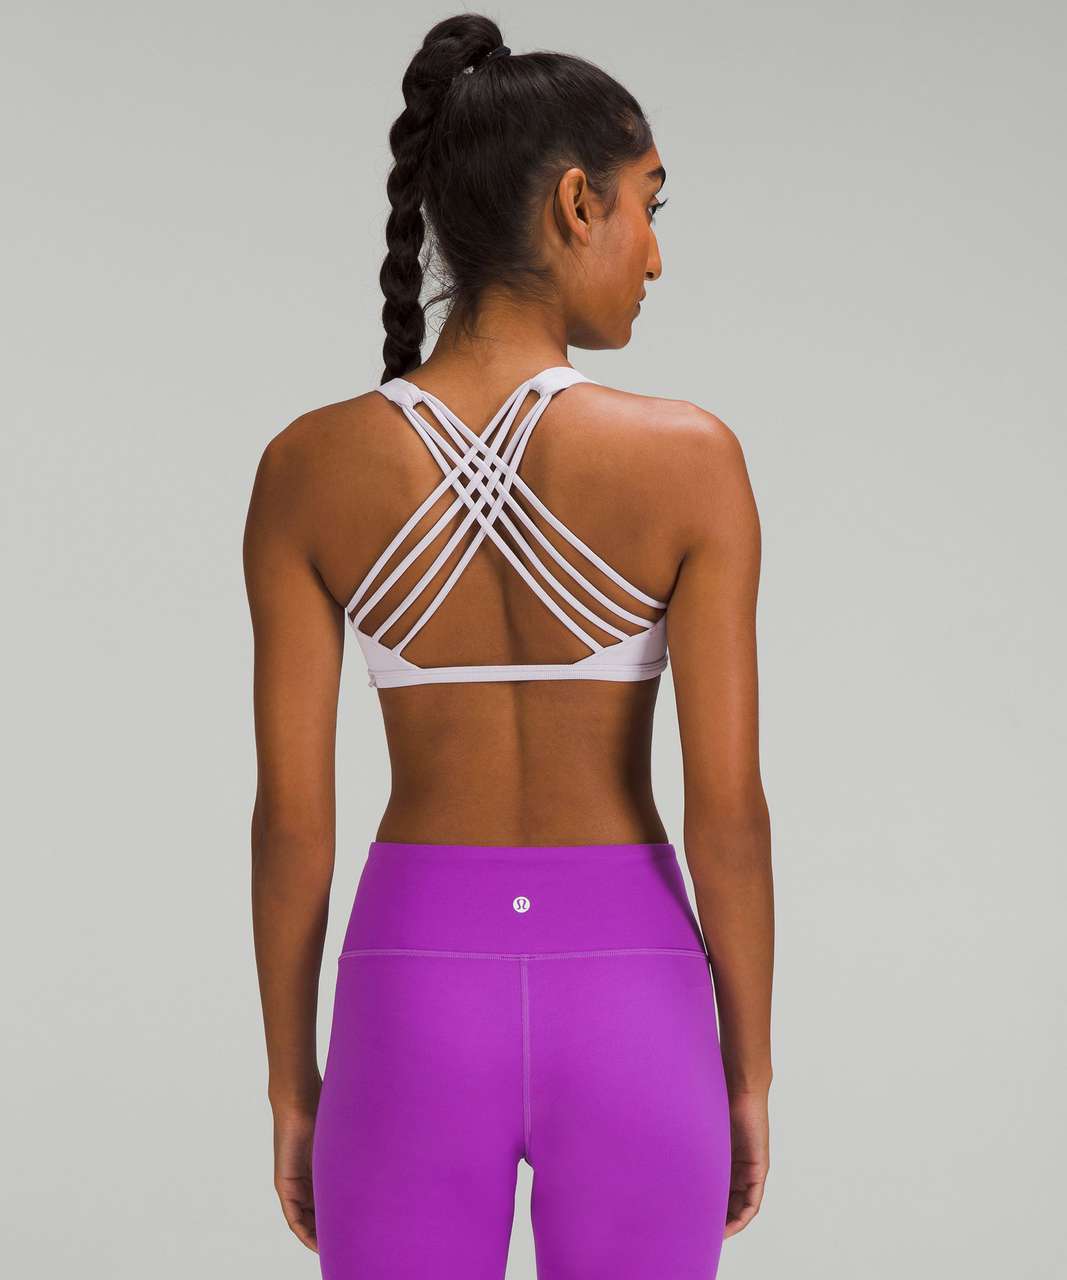 Lululemon Free to Be Ribbed Bra - Wild *Light Support, A/B Cup - Faint Lavender